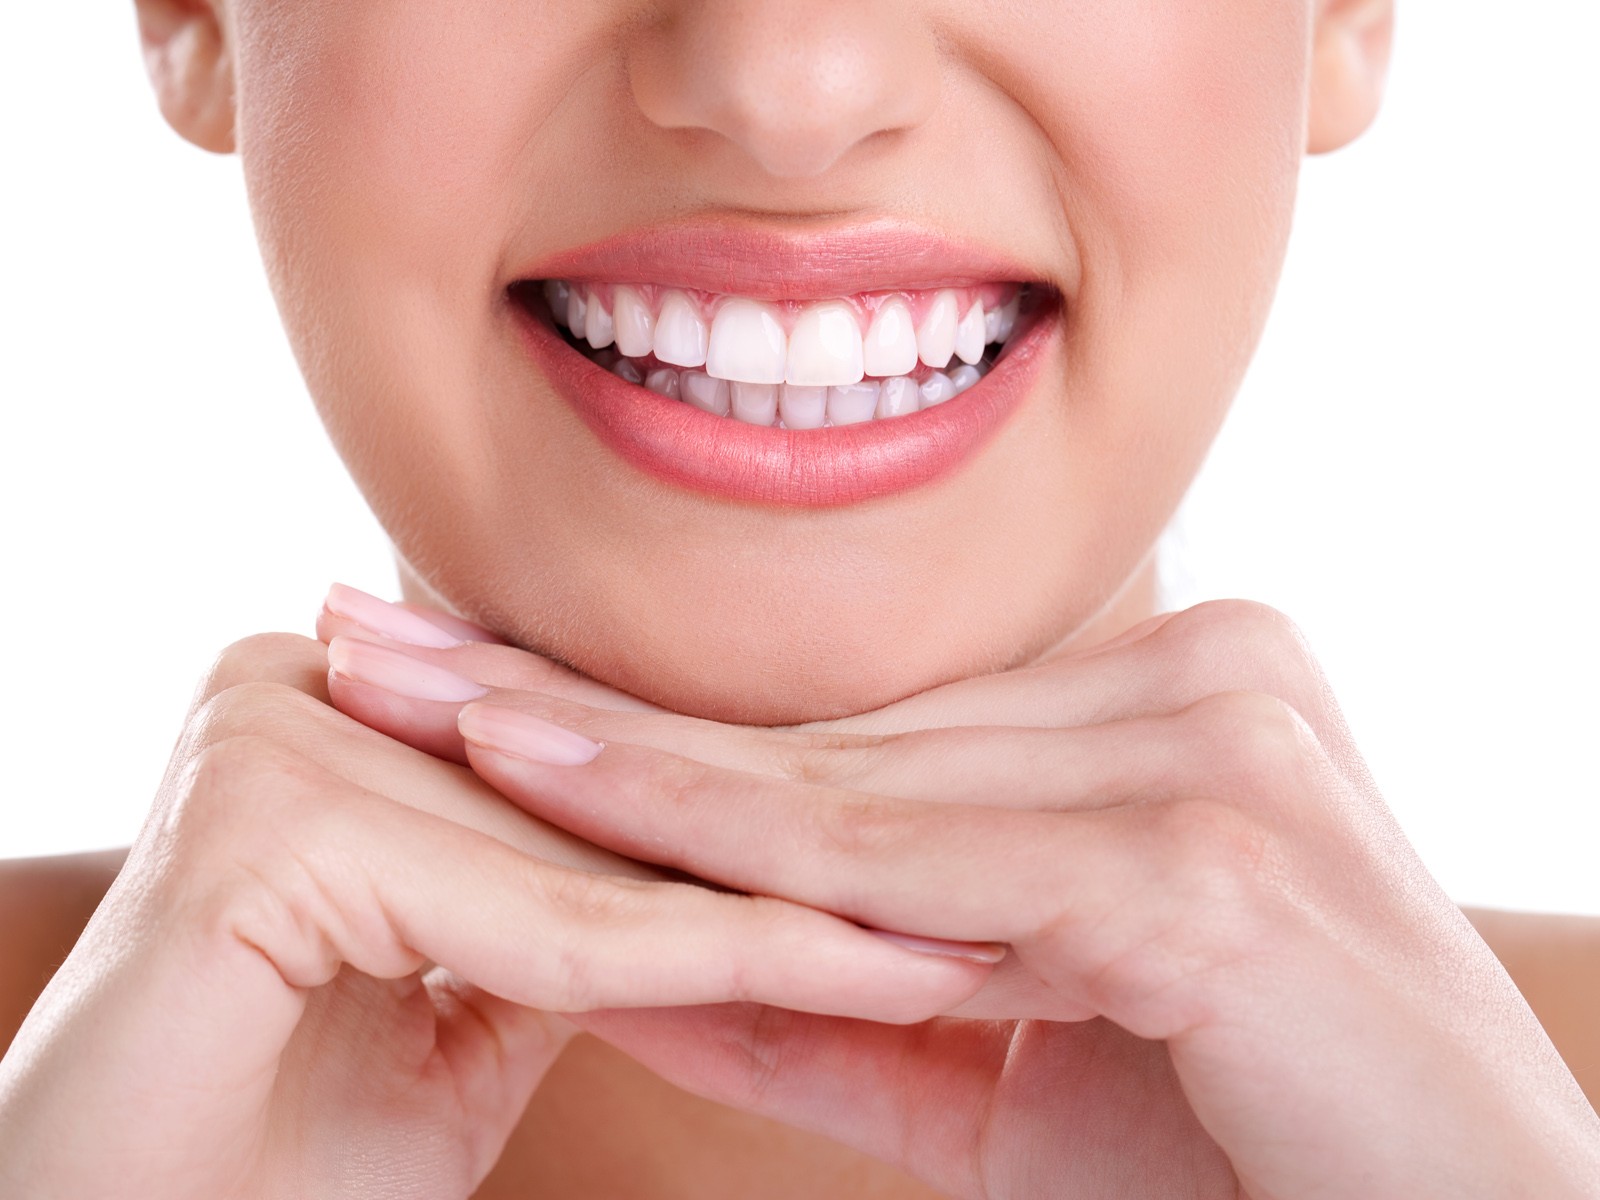 Clear Braces Vs. Clear Aligners: What Is the Difference?